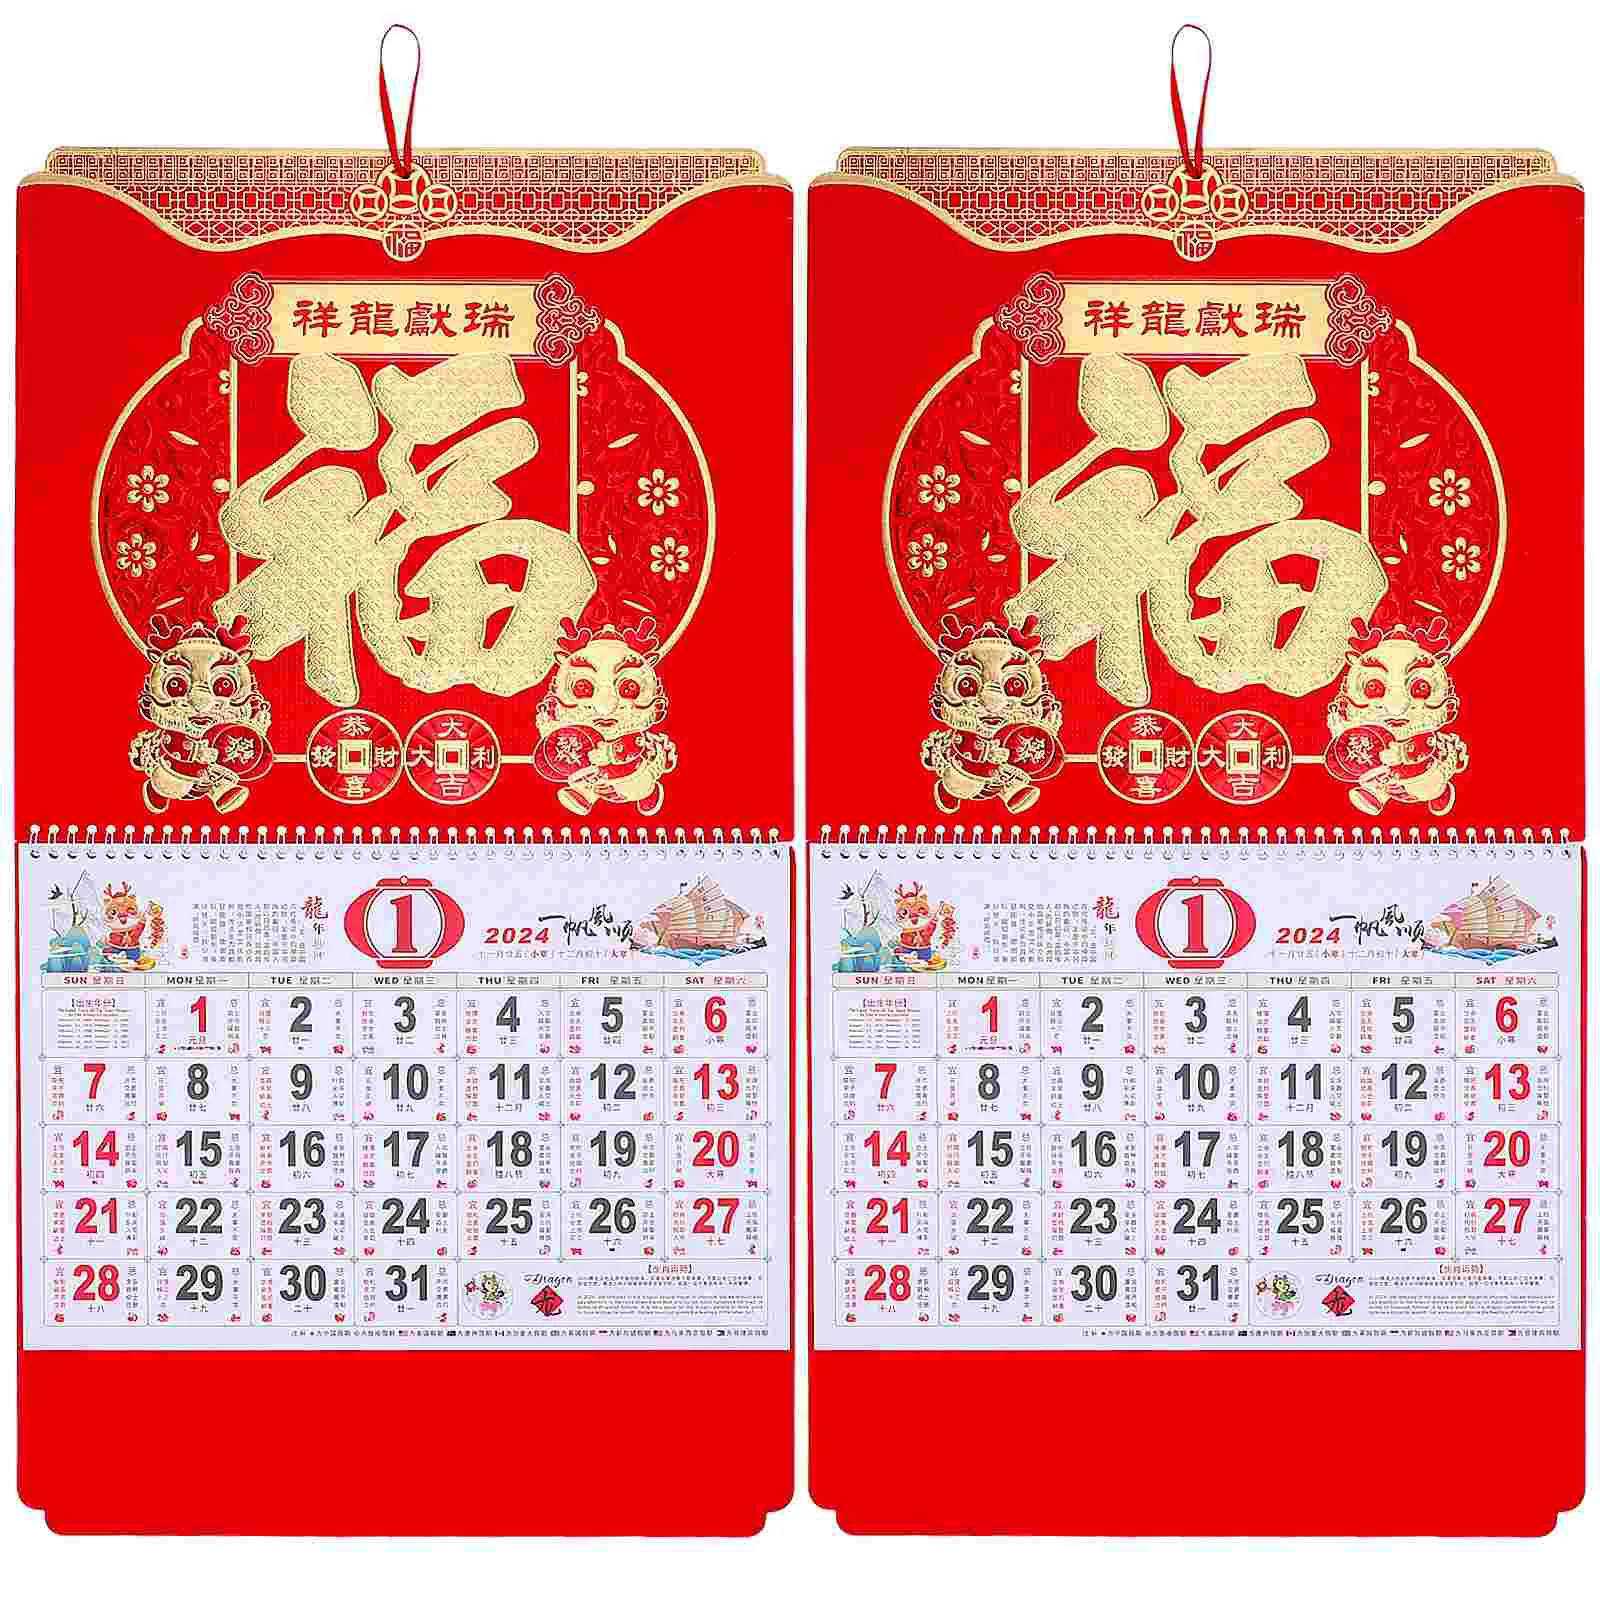 

2 Pcs Wall Calendar Paper Delicate Hanging The Year Of Dragon Thicken For Planning Daily Lunar Office